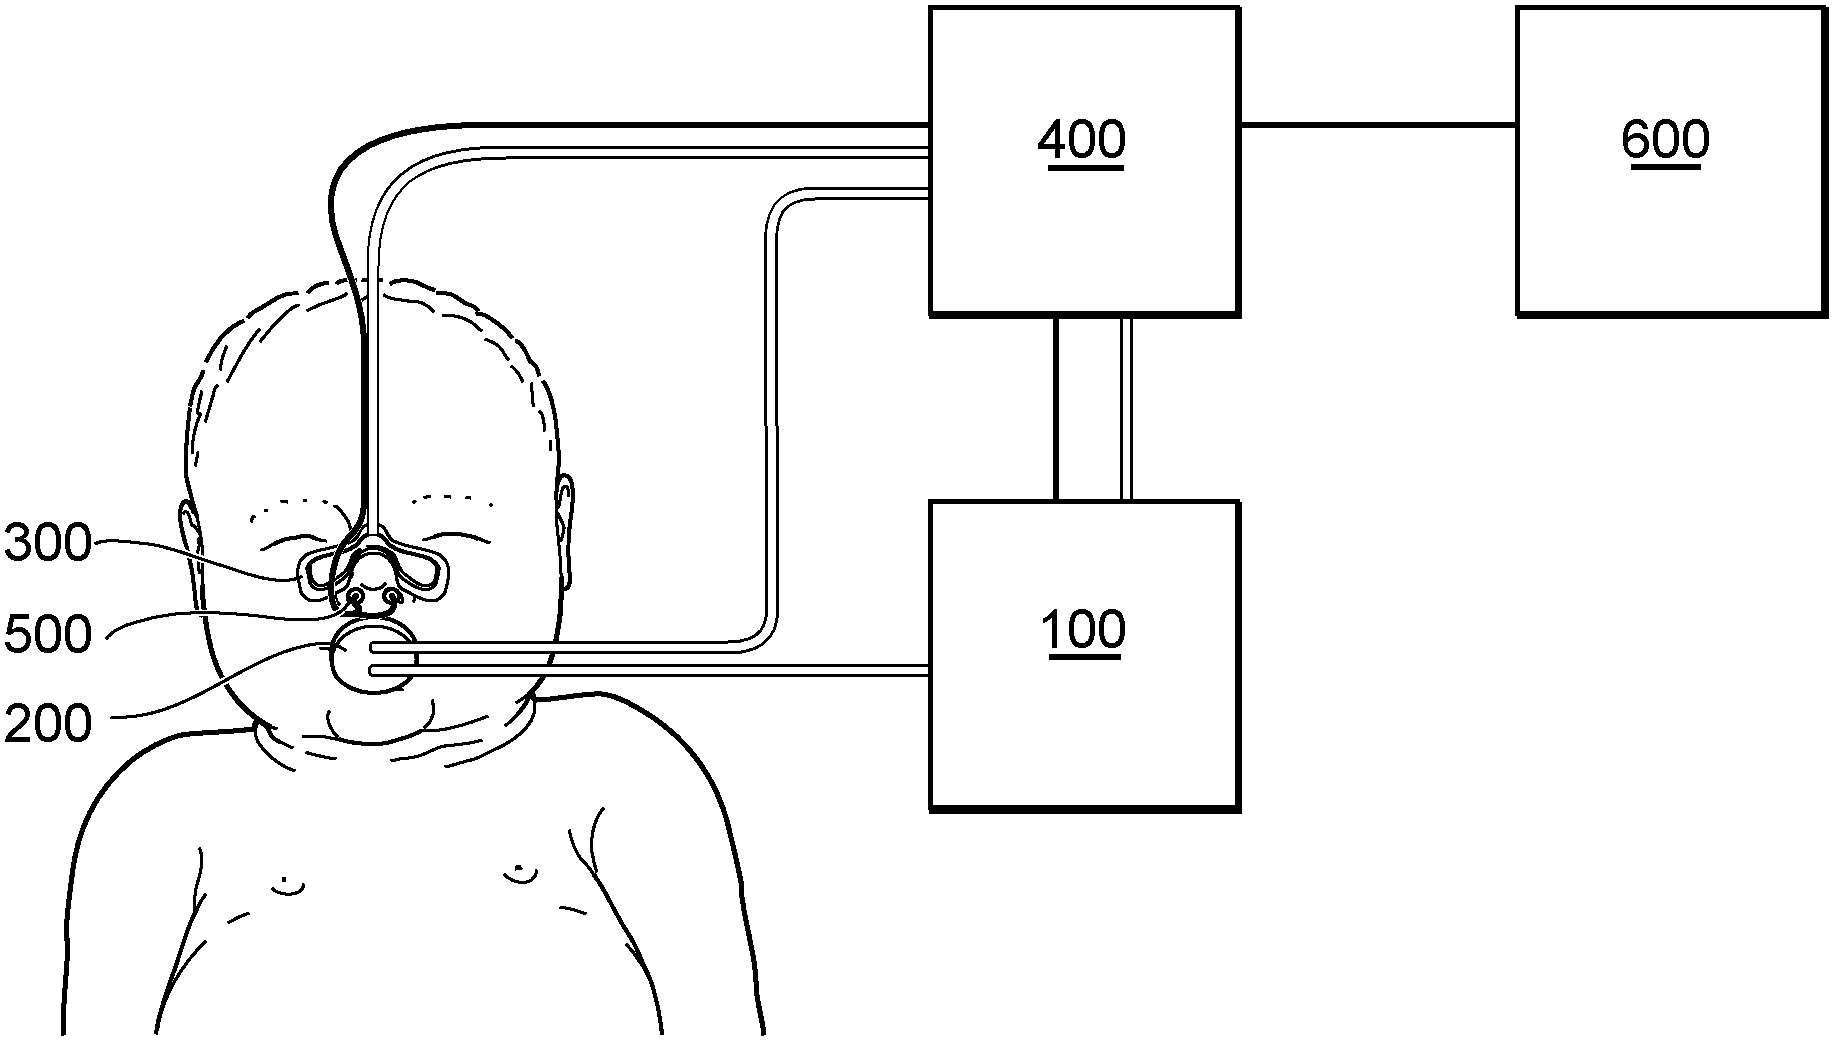 Apparatus and method for the collection of samples of exhaled air